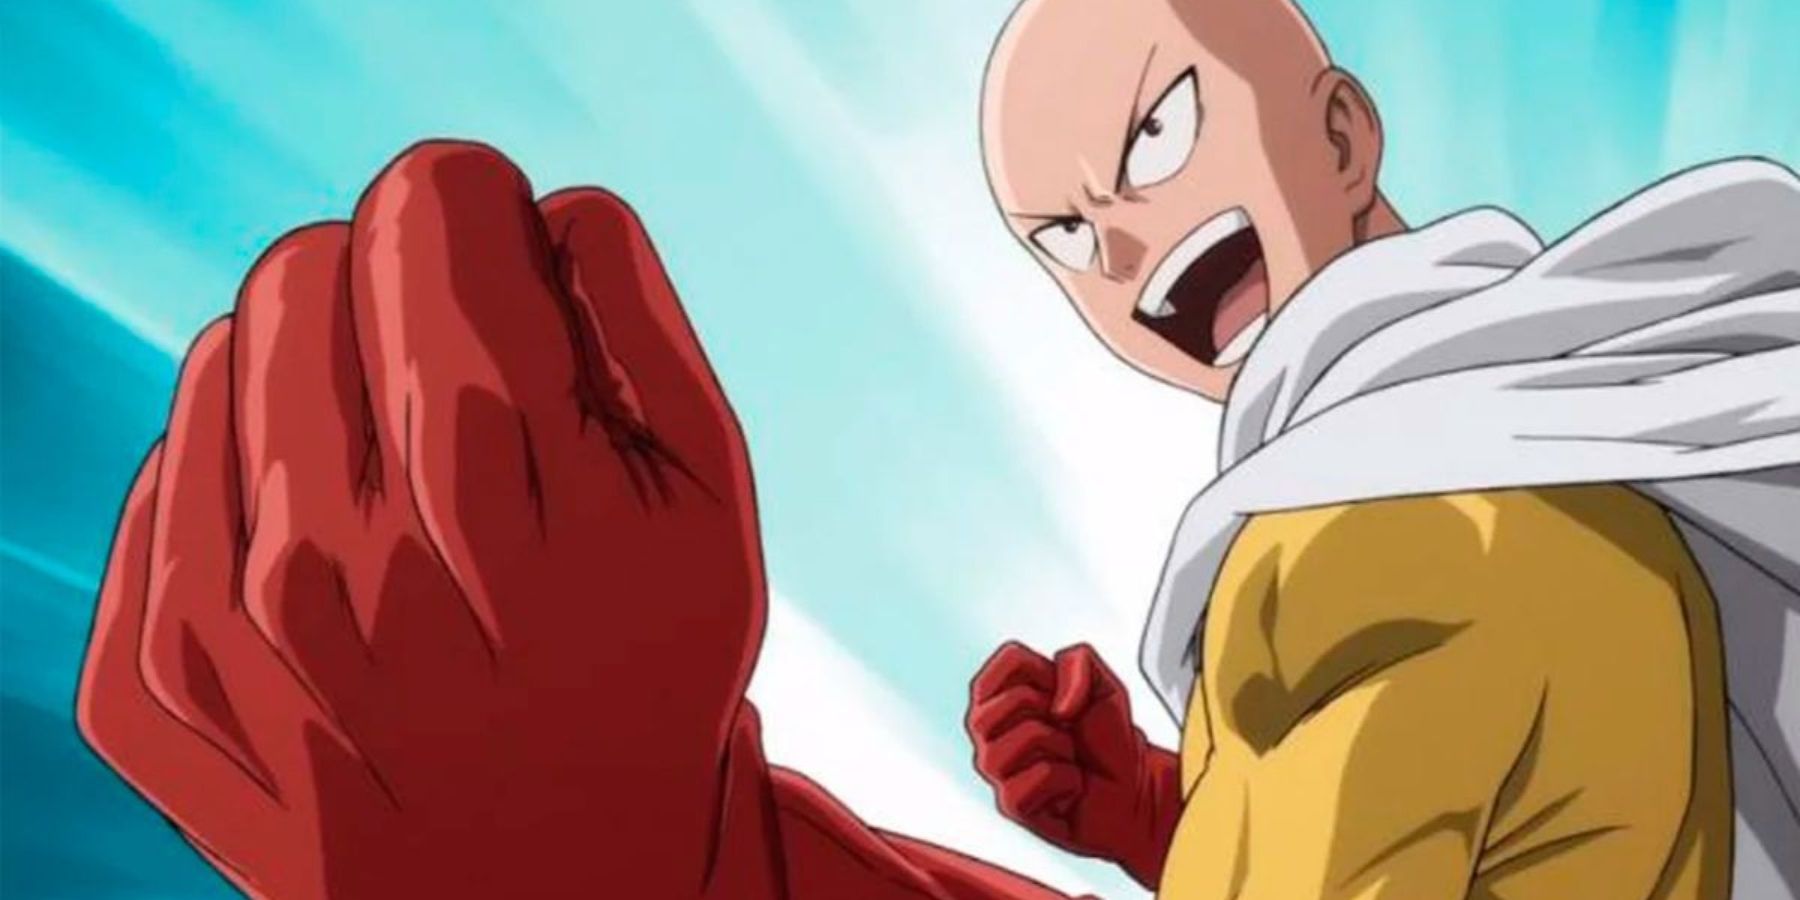 Saitama Excited For A Fight